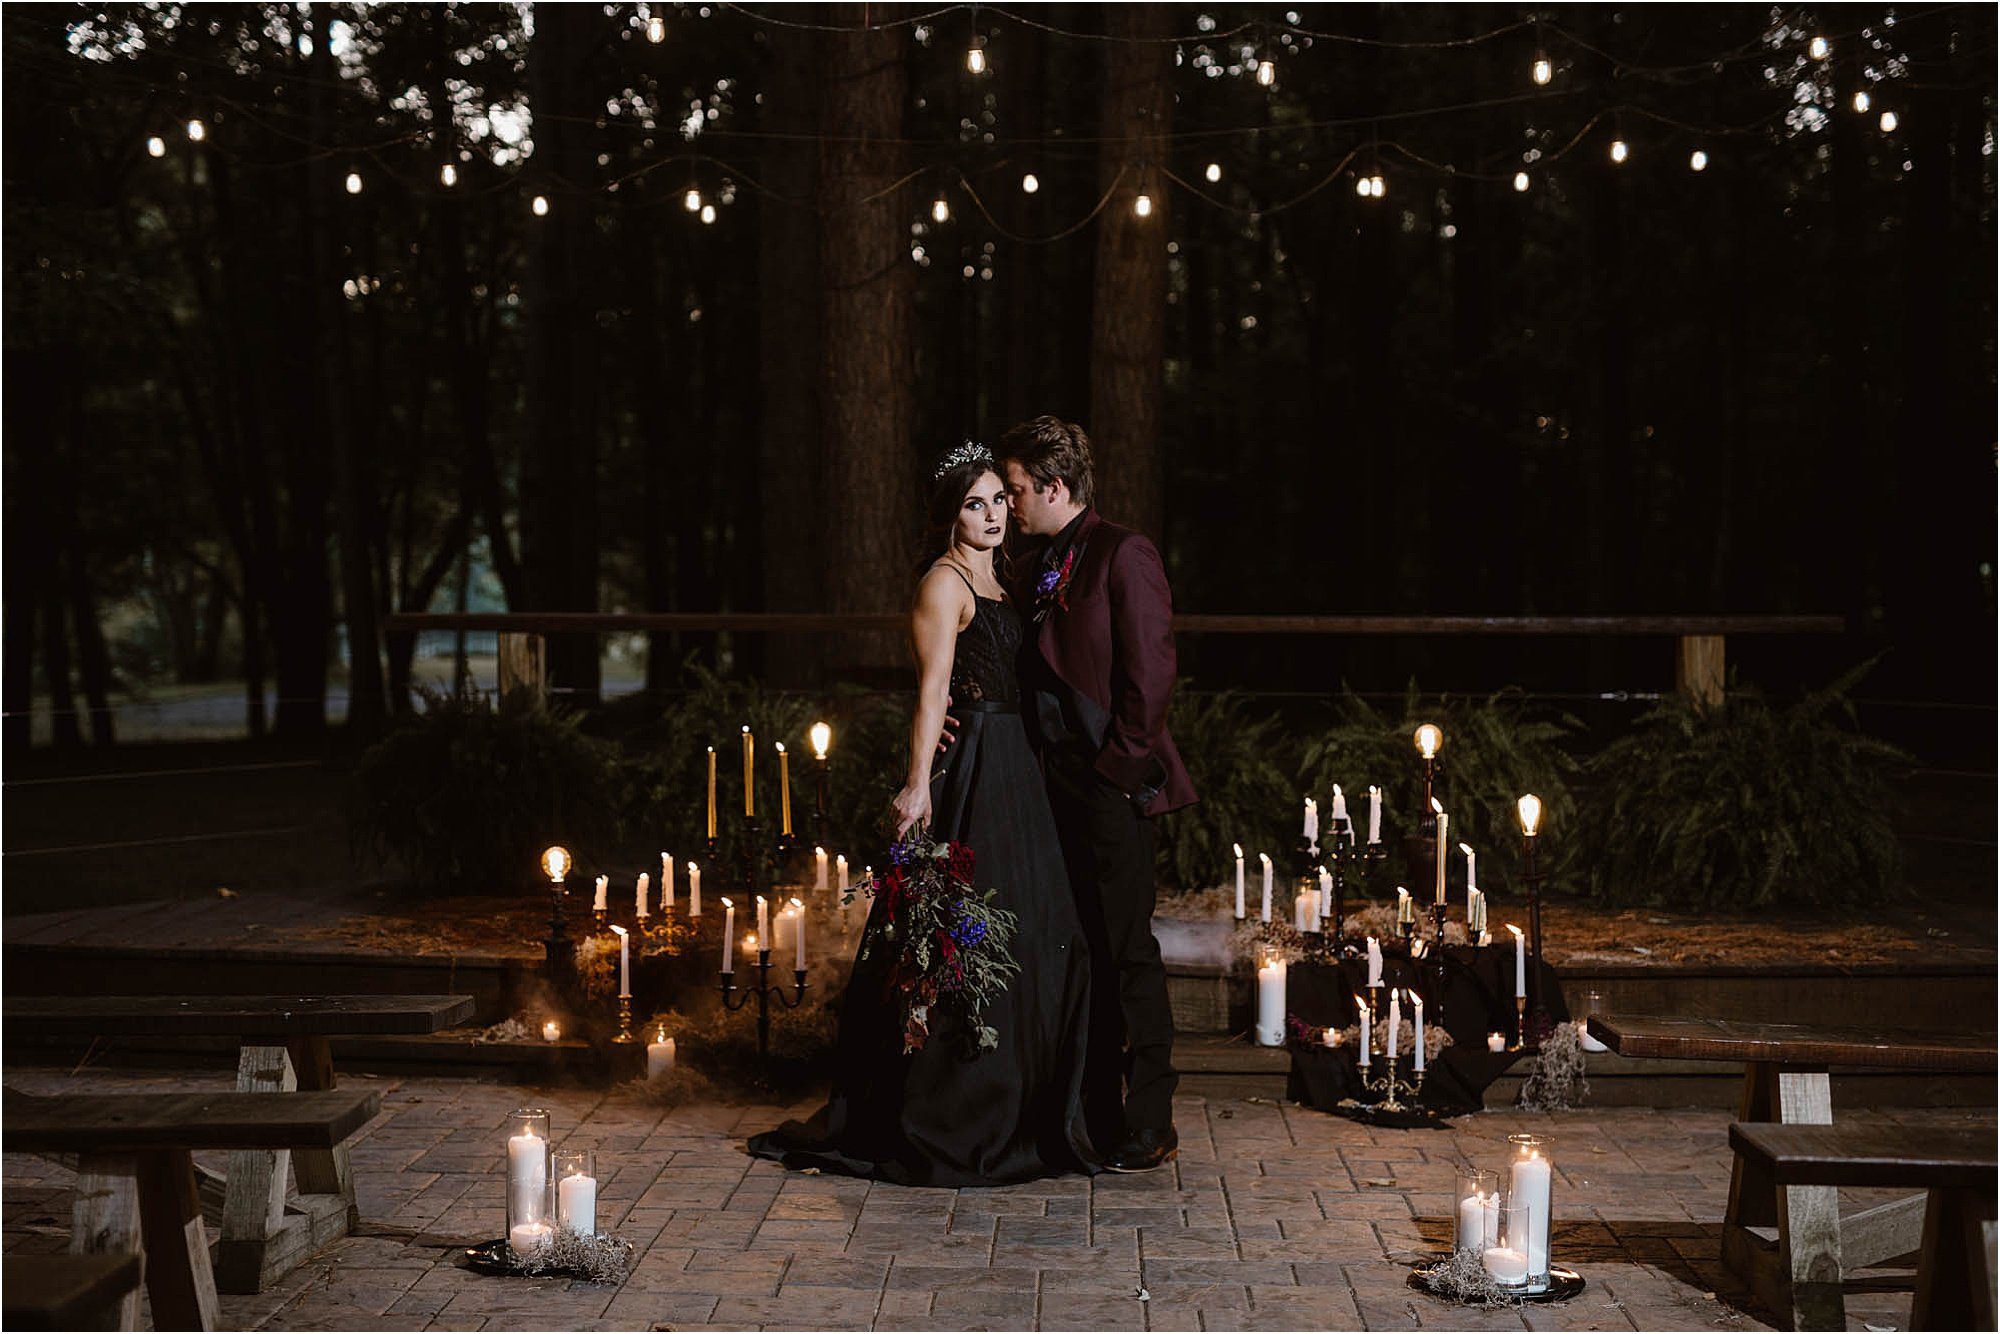 Halloween wedding ceremony ideas with candles